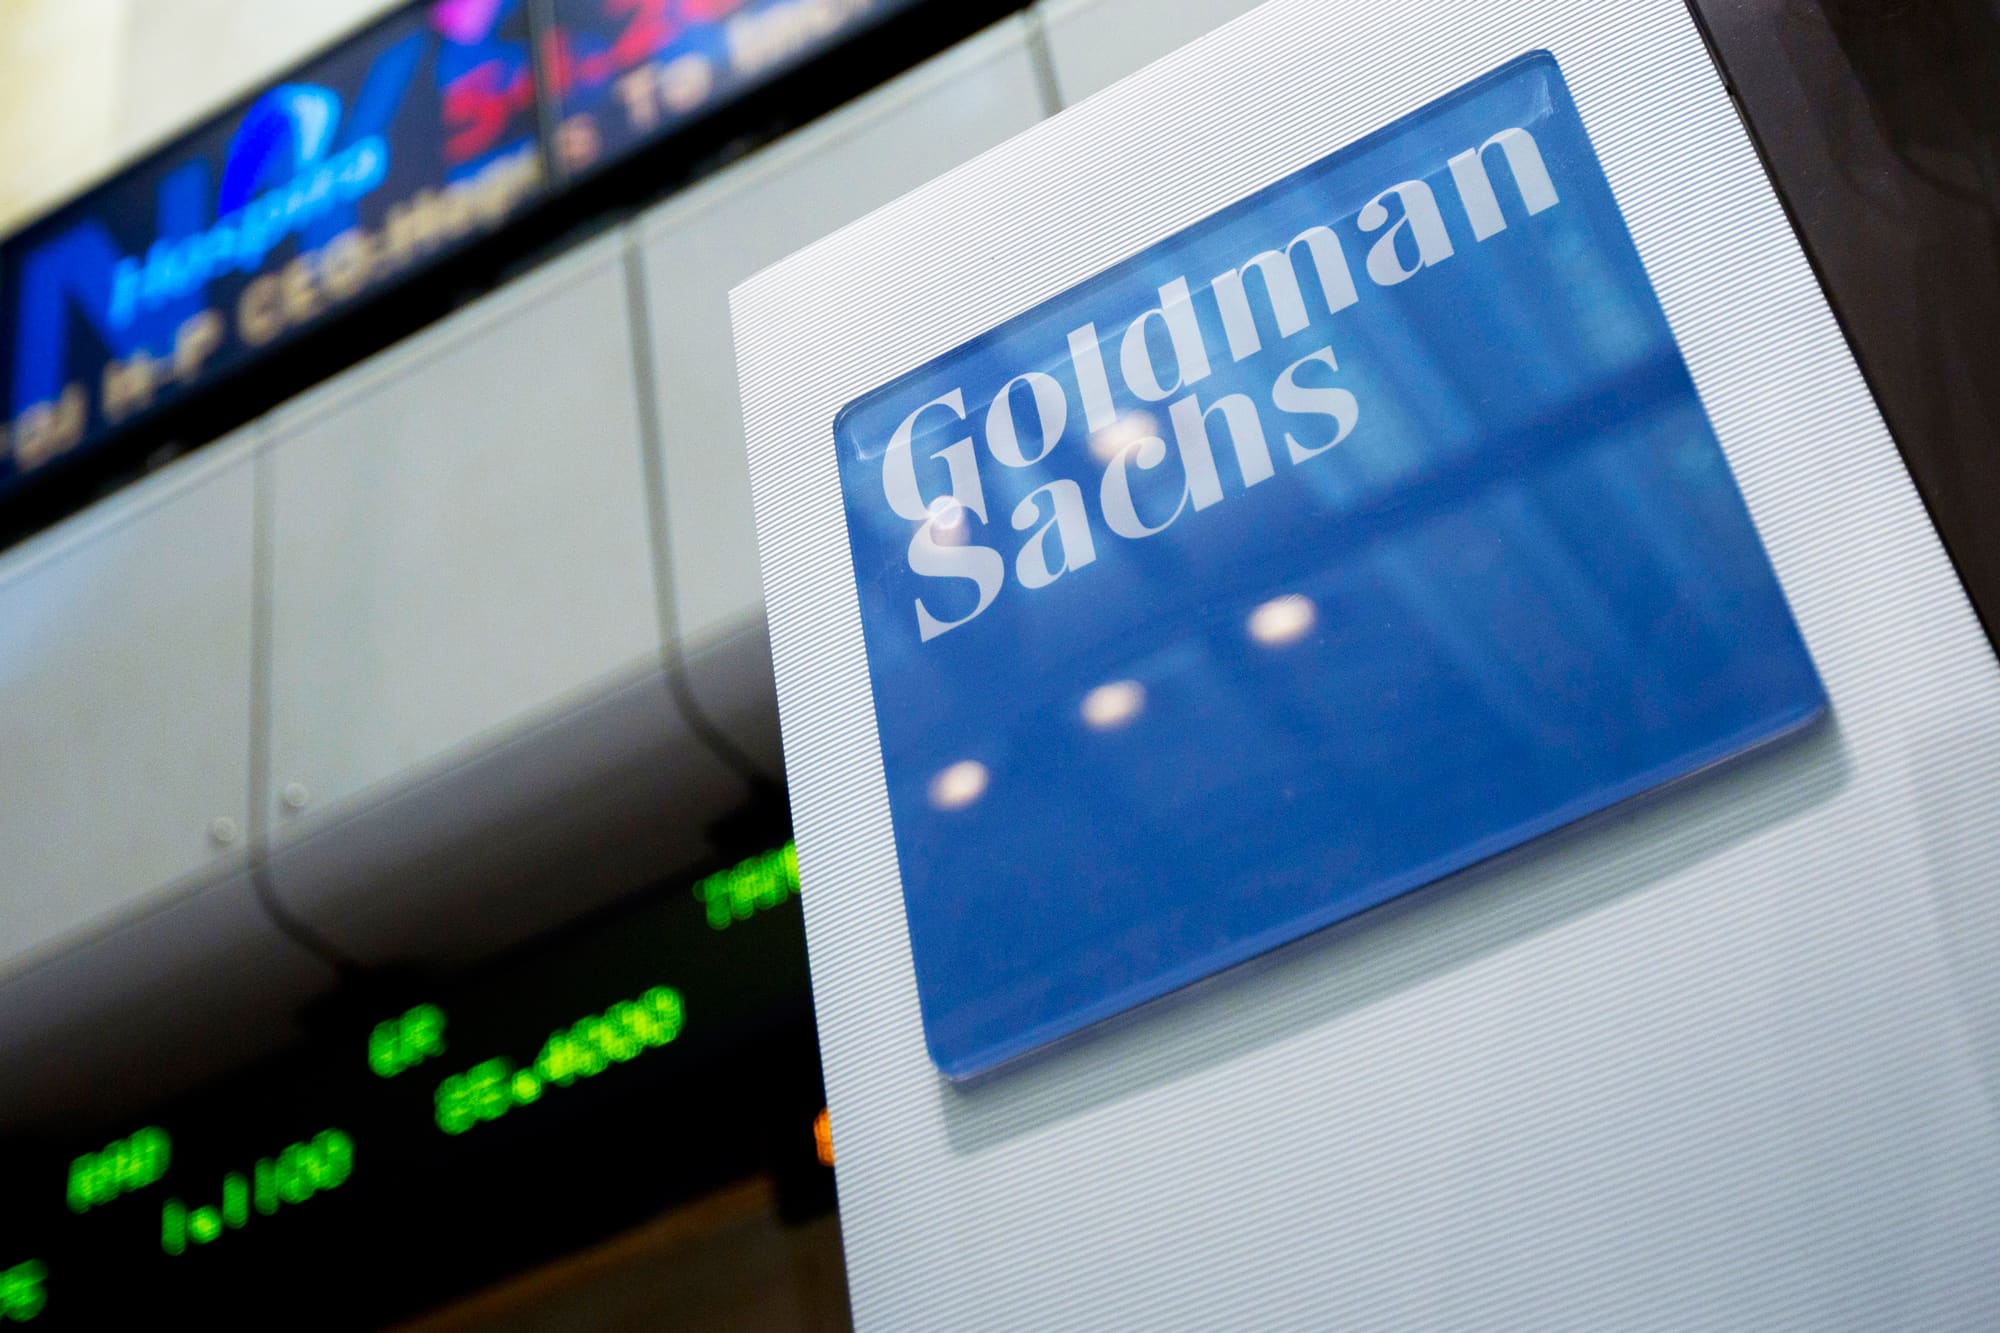 Jim Cramer says Goldman Sachs shares are a ‘steal’ after post-earnings tumble – CNBC